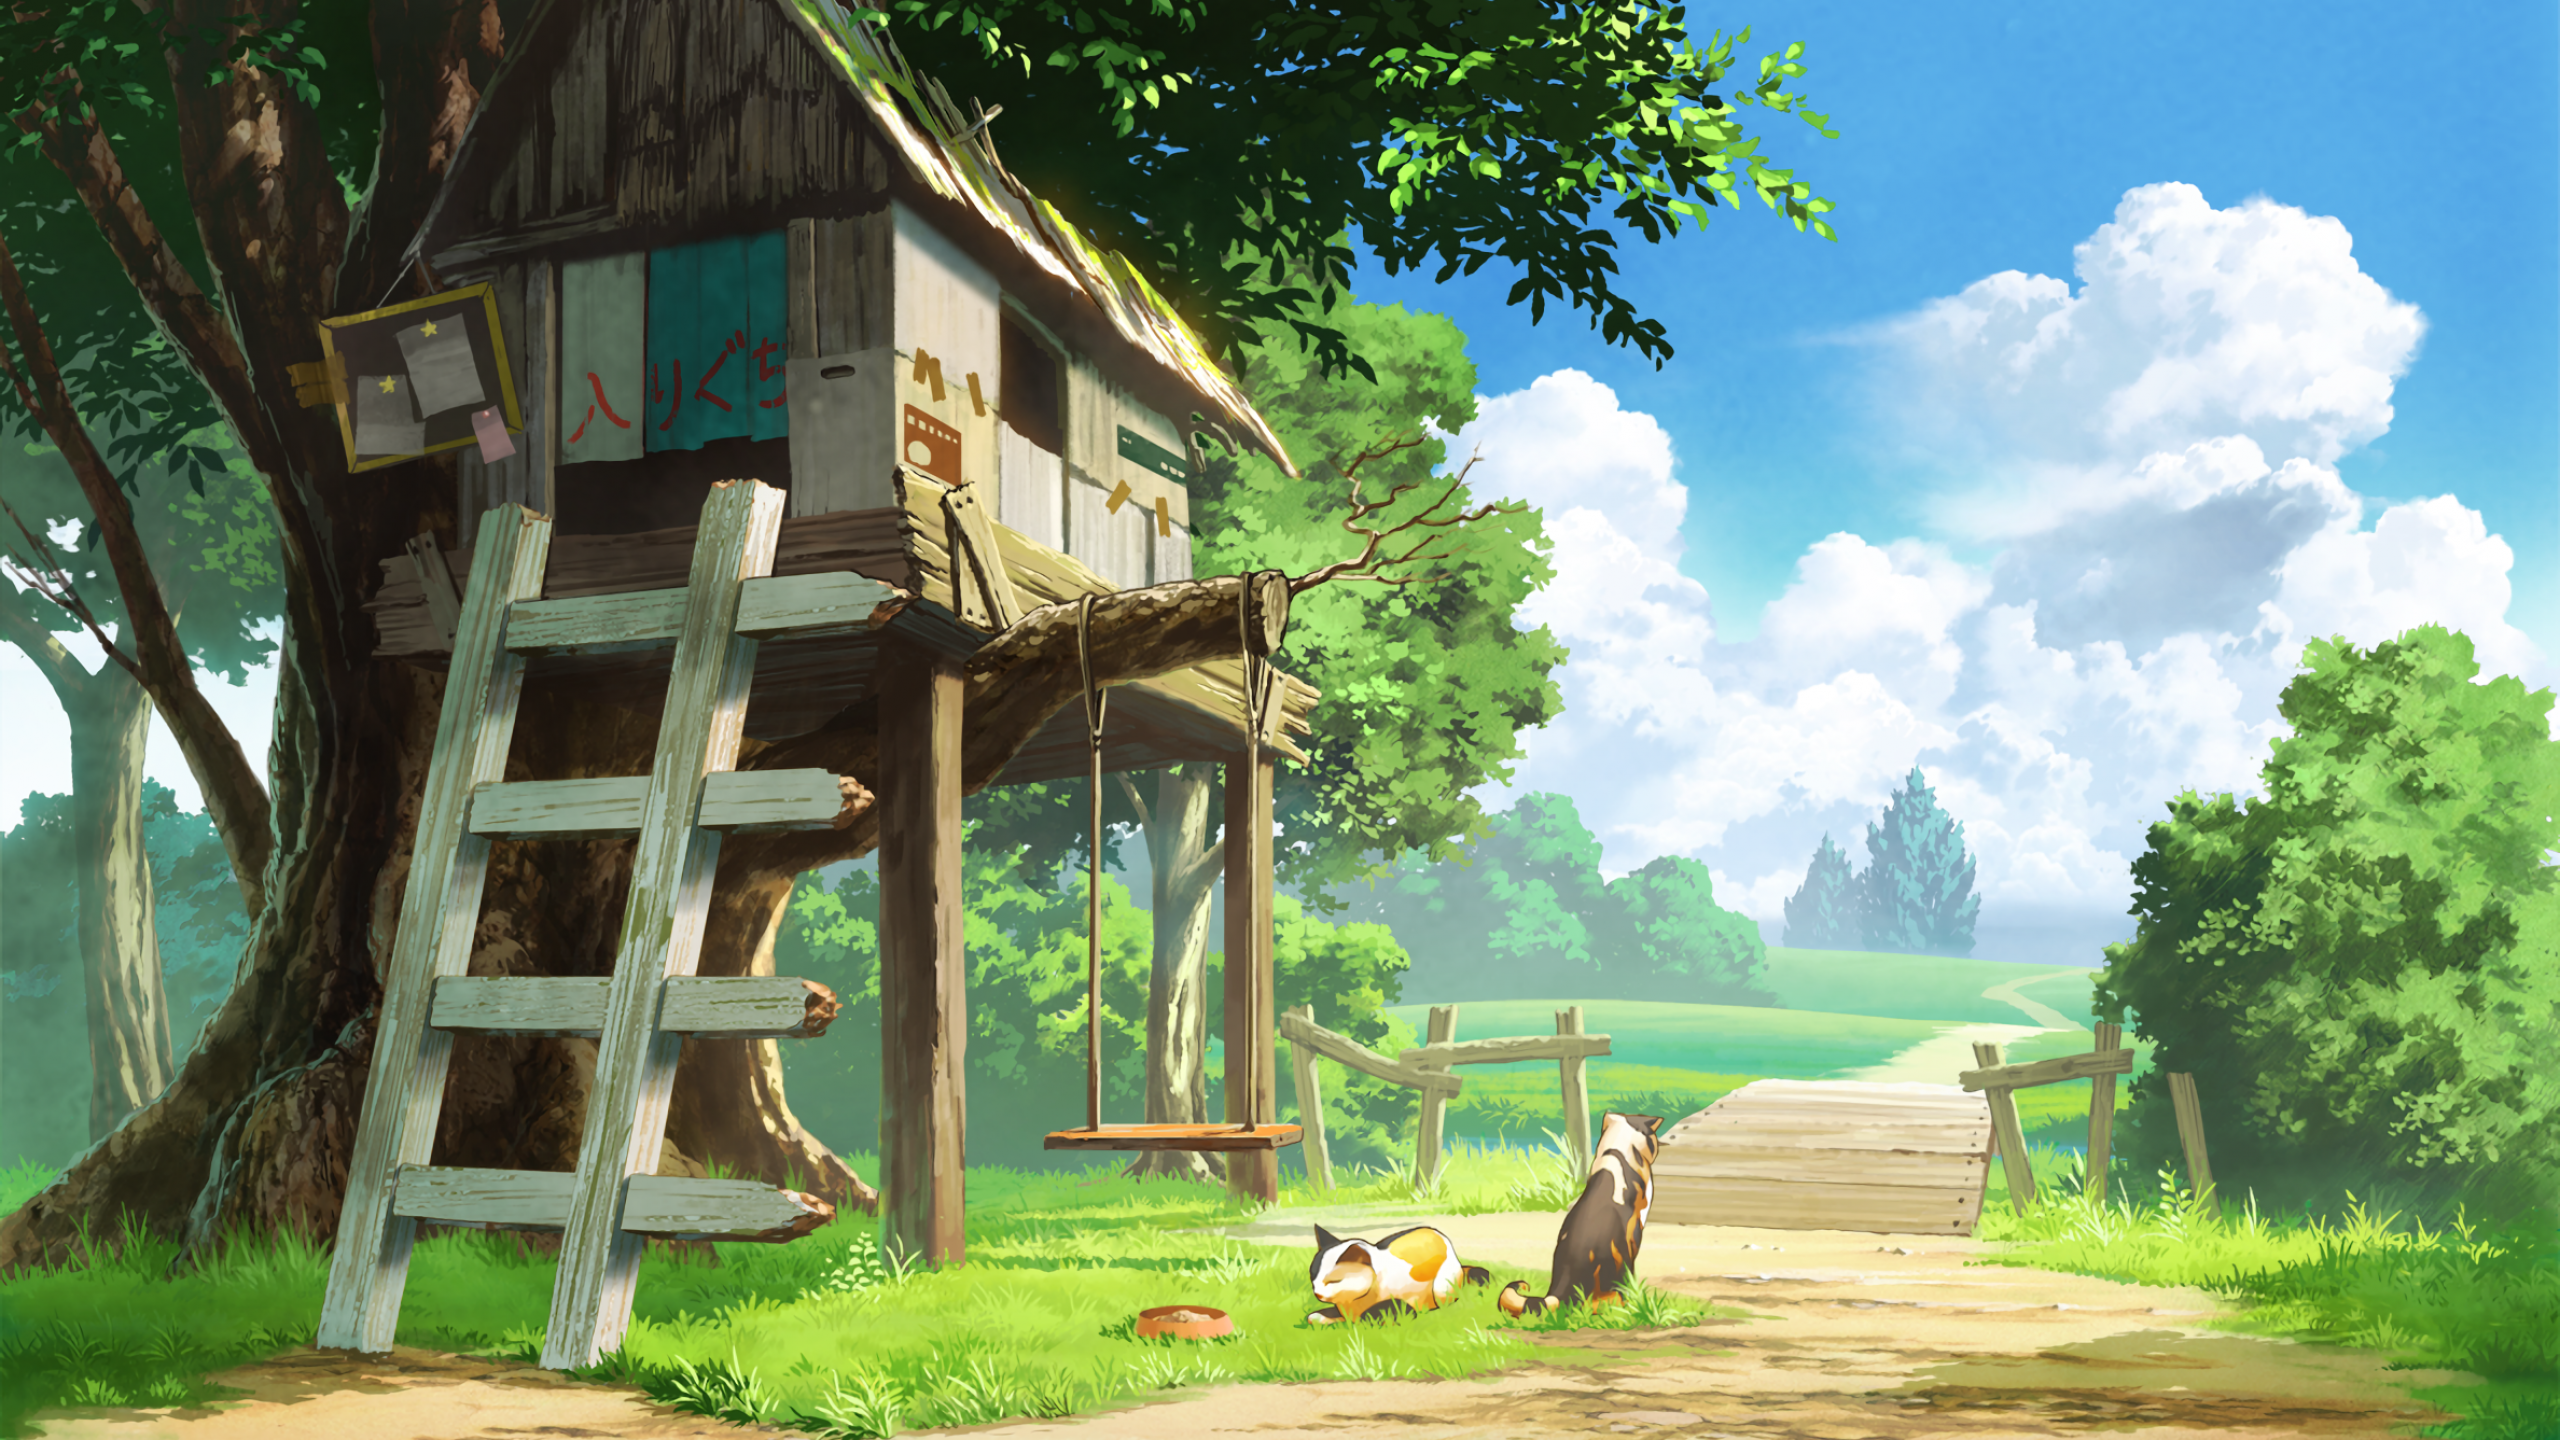 Download 2560x1440 Anime Landscape, Tree House, Cats, Clouds